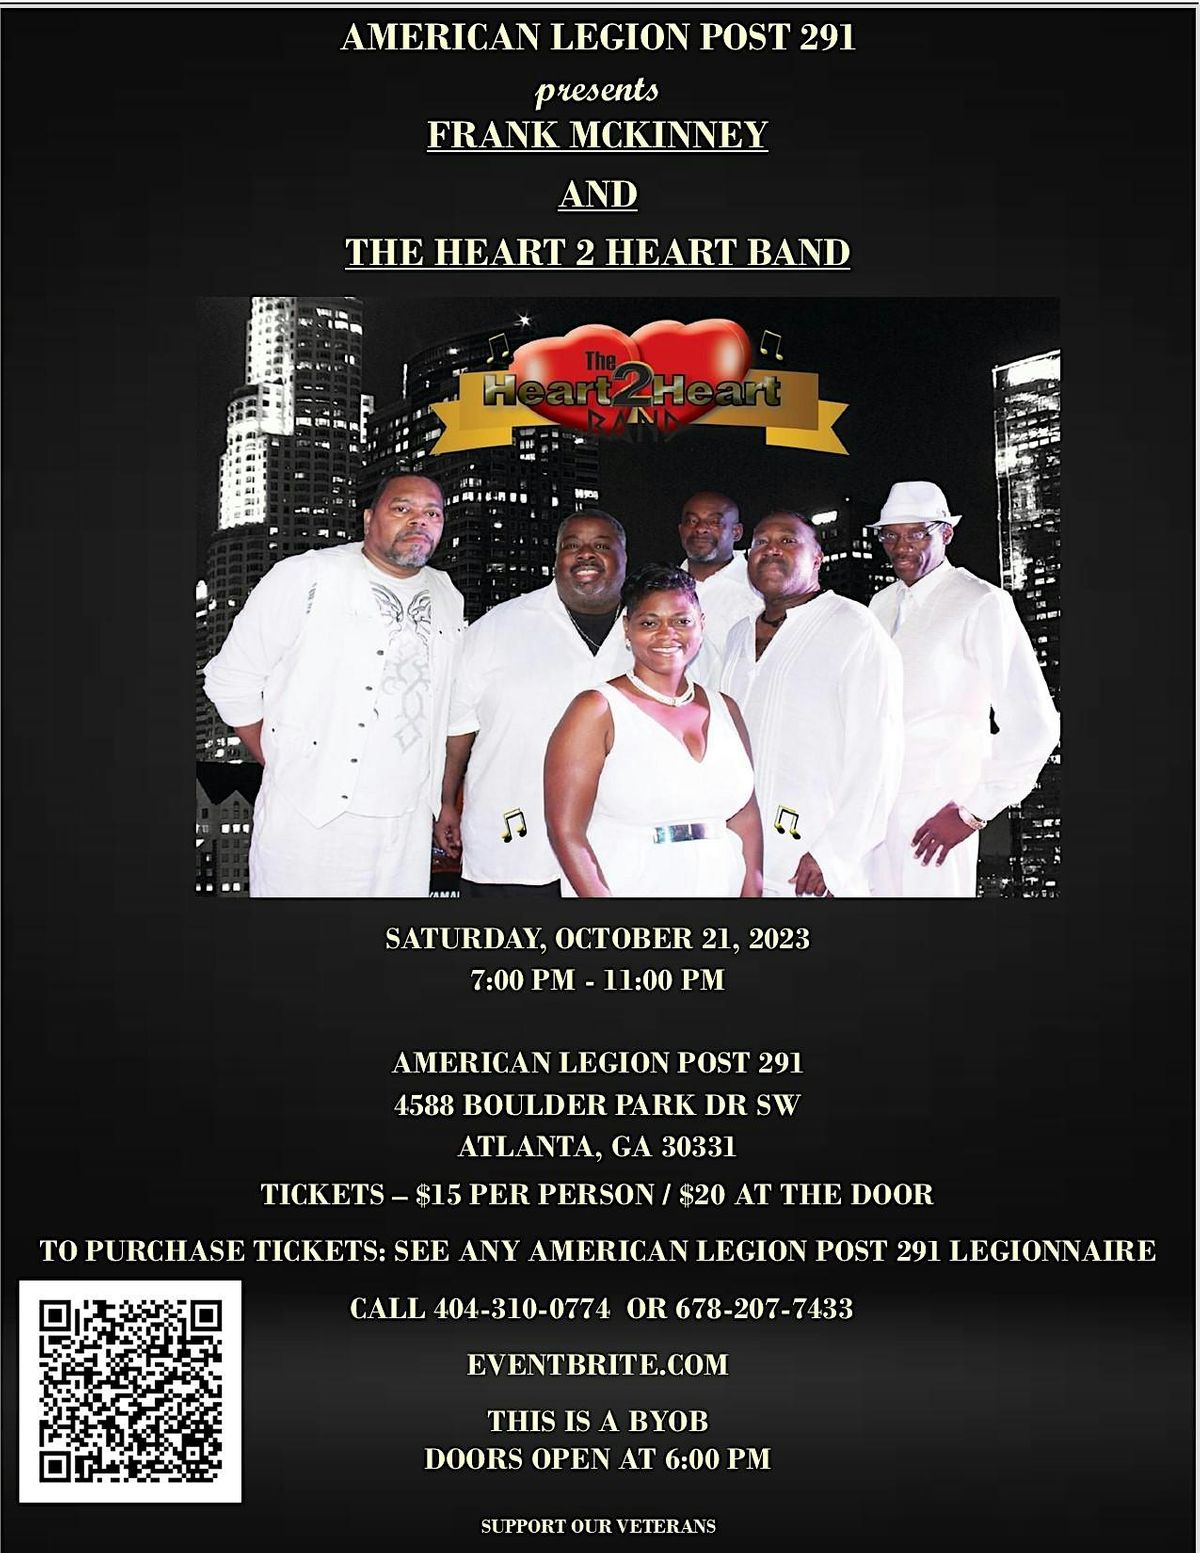 FRANK MCKINNEY AND THE HEART2HEART BAND